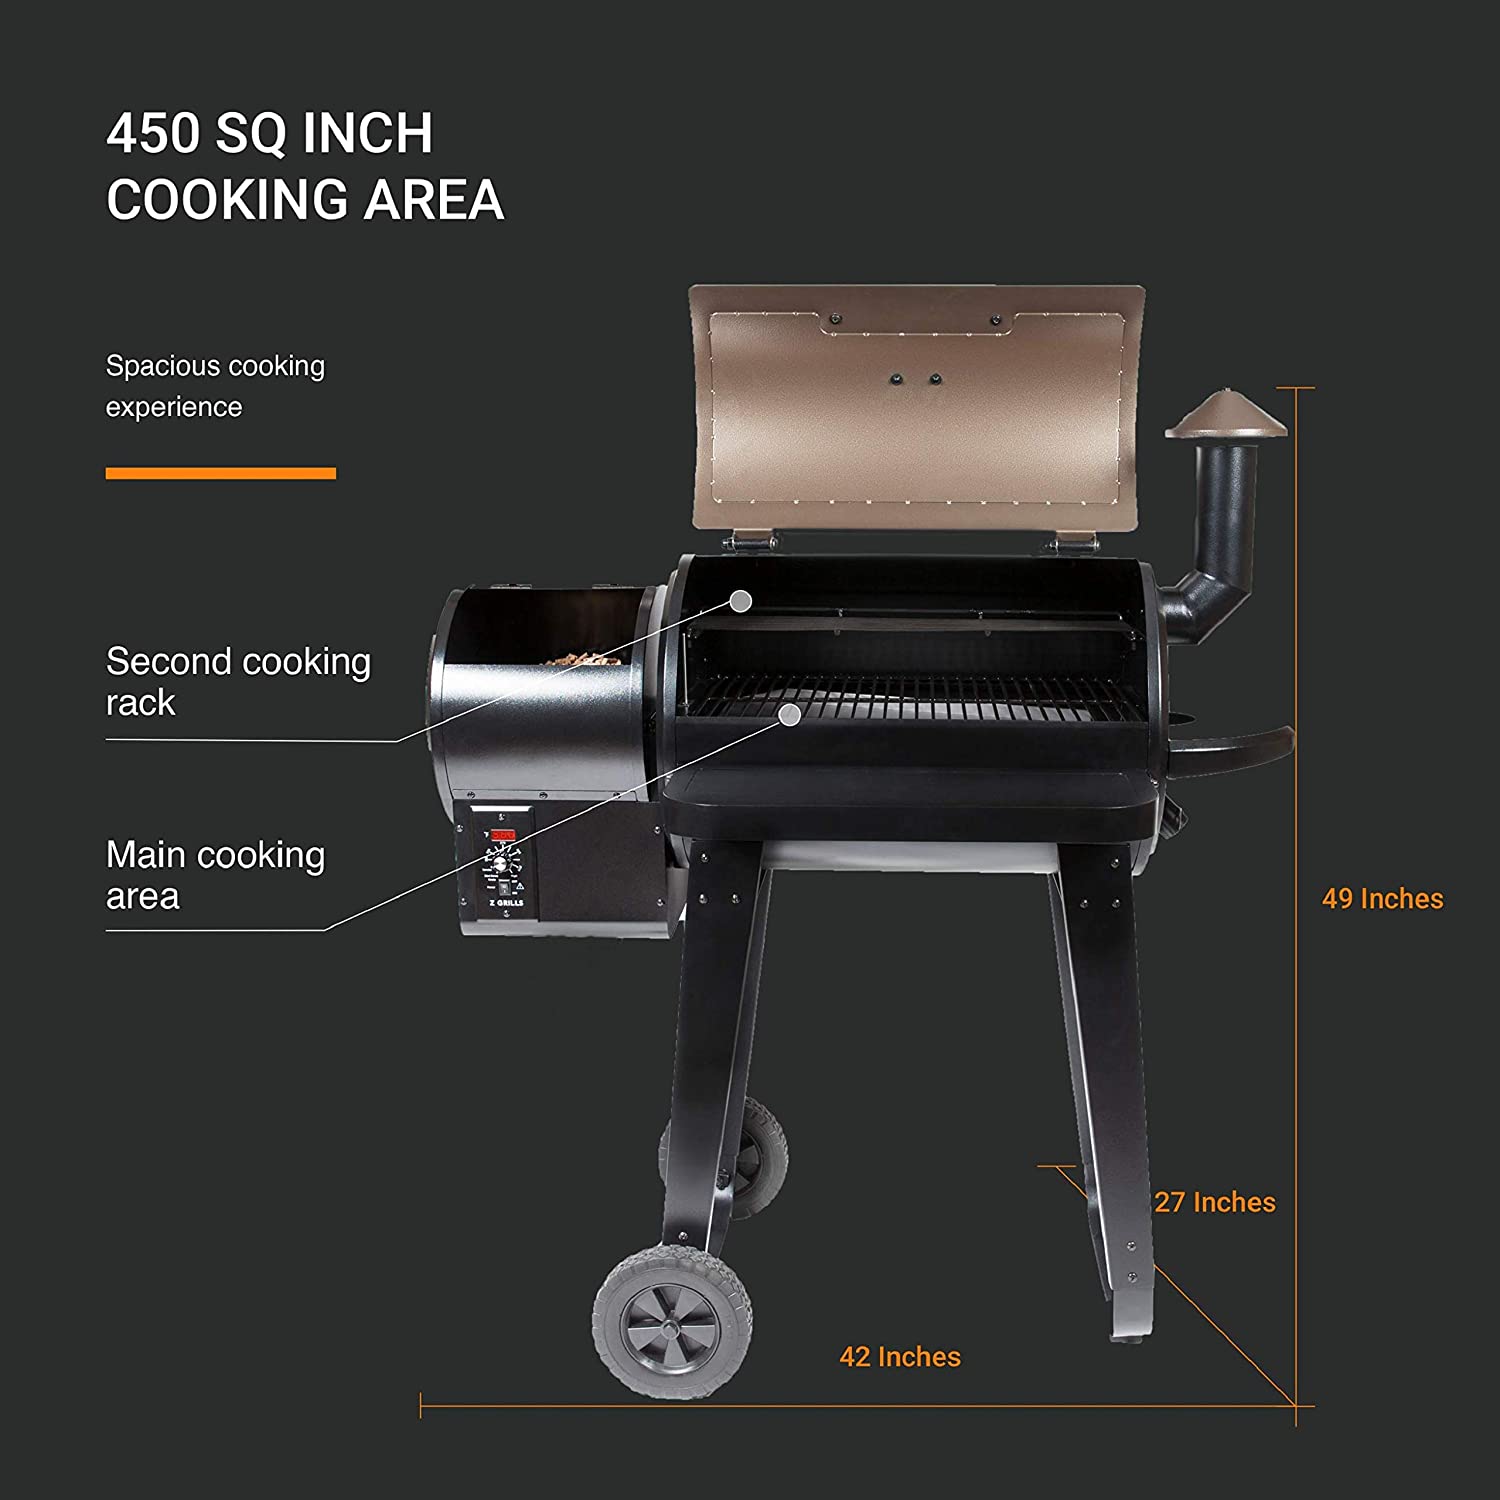 Z GRILLS ZPG-450A 2020 Upgrade Wood Pellet Grill & Smoker 6 in 1 BBQ Grill Auto Temperature Control, 450 sq in, Bronze - image 5 of 7